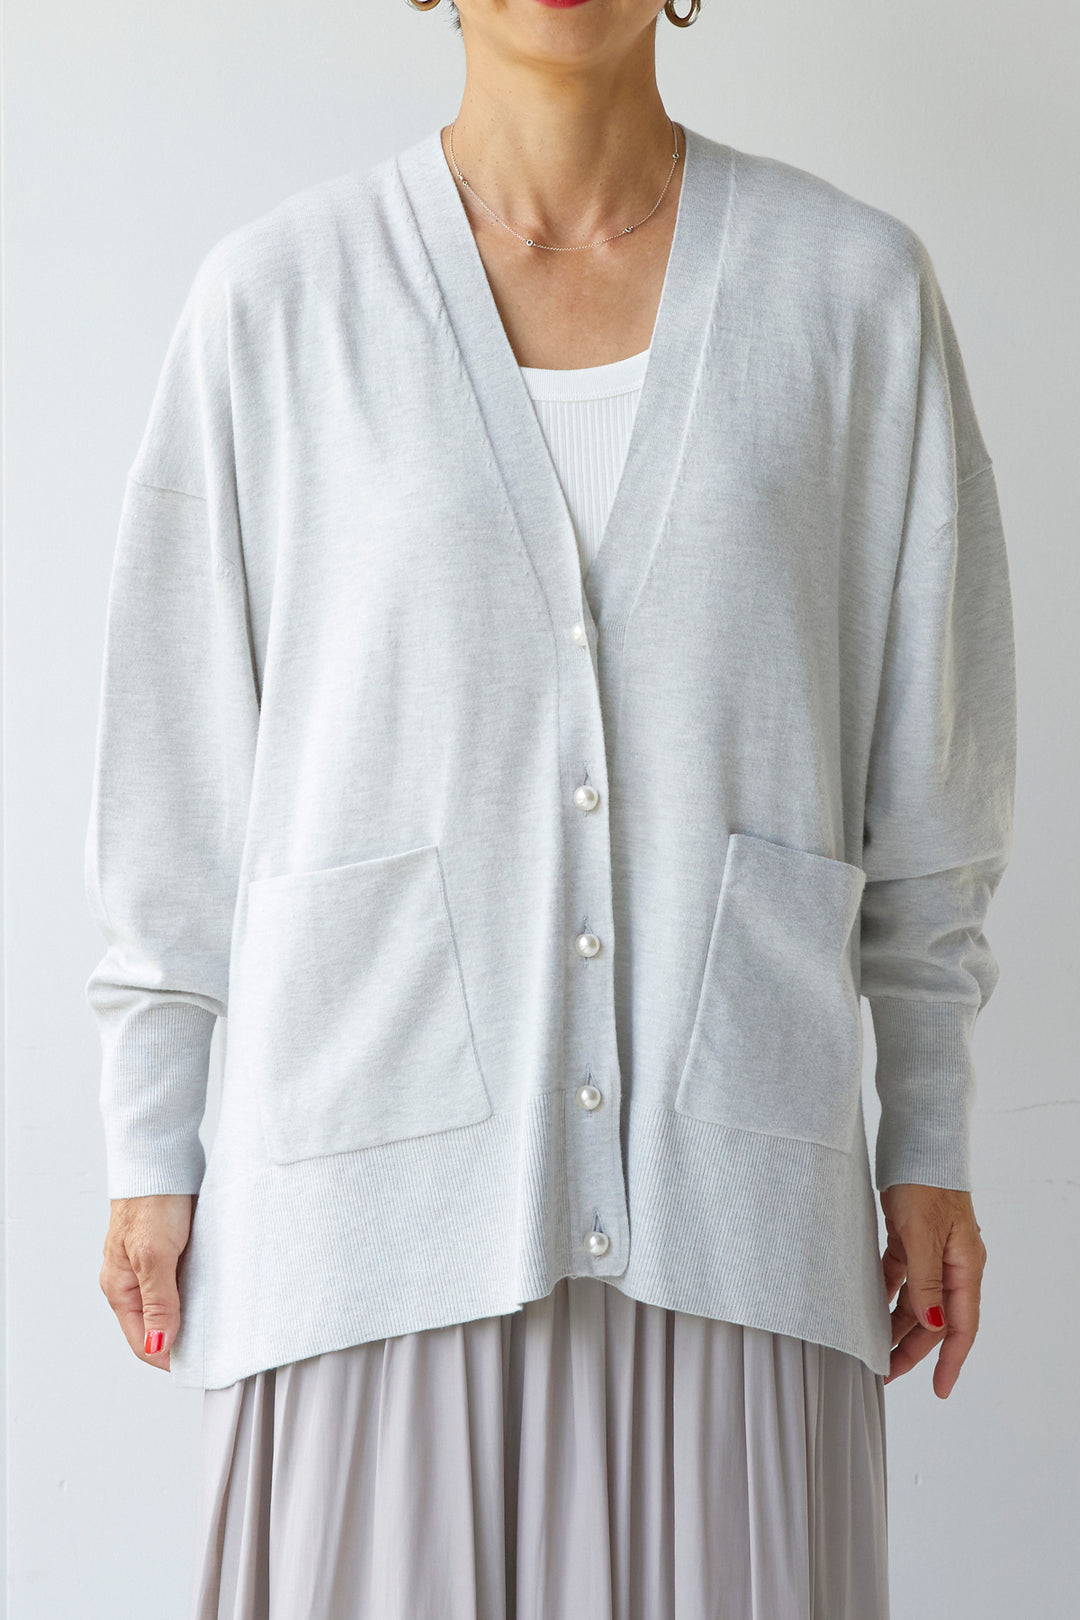 [Anti-static, anti-bacterial, UV protection, moisture absorbing and heat generating] Warm knit cardigan